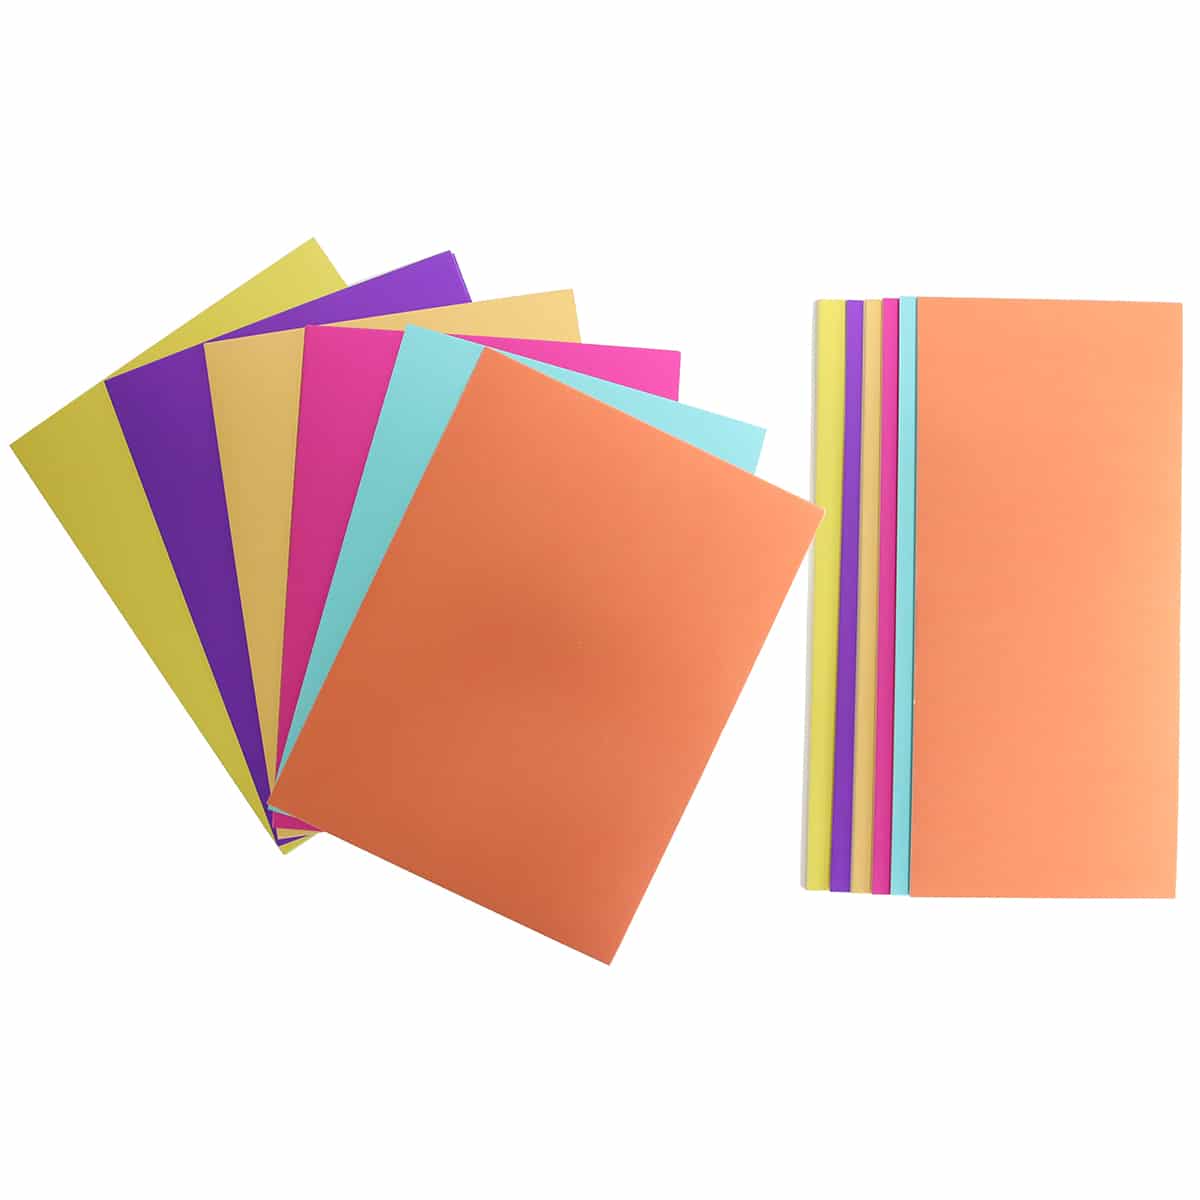 A pile of Bright Matte Foil Cardstock papers in different colors on a white background.